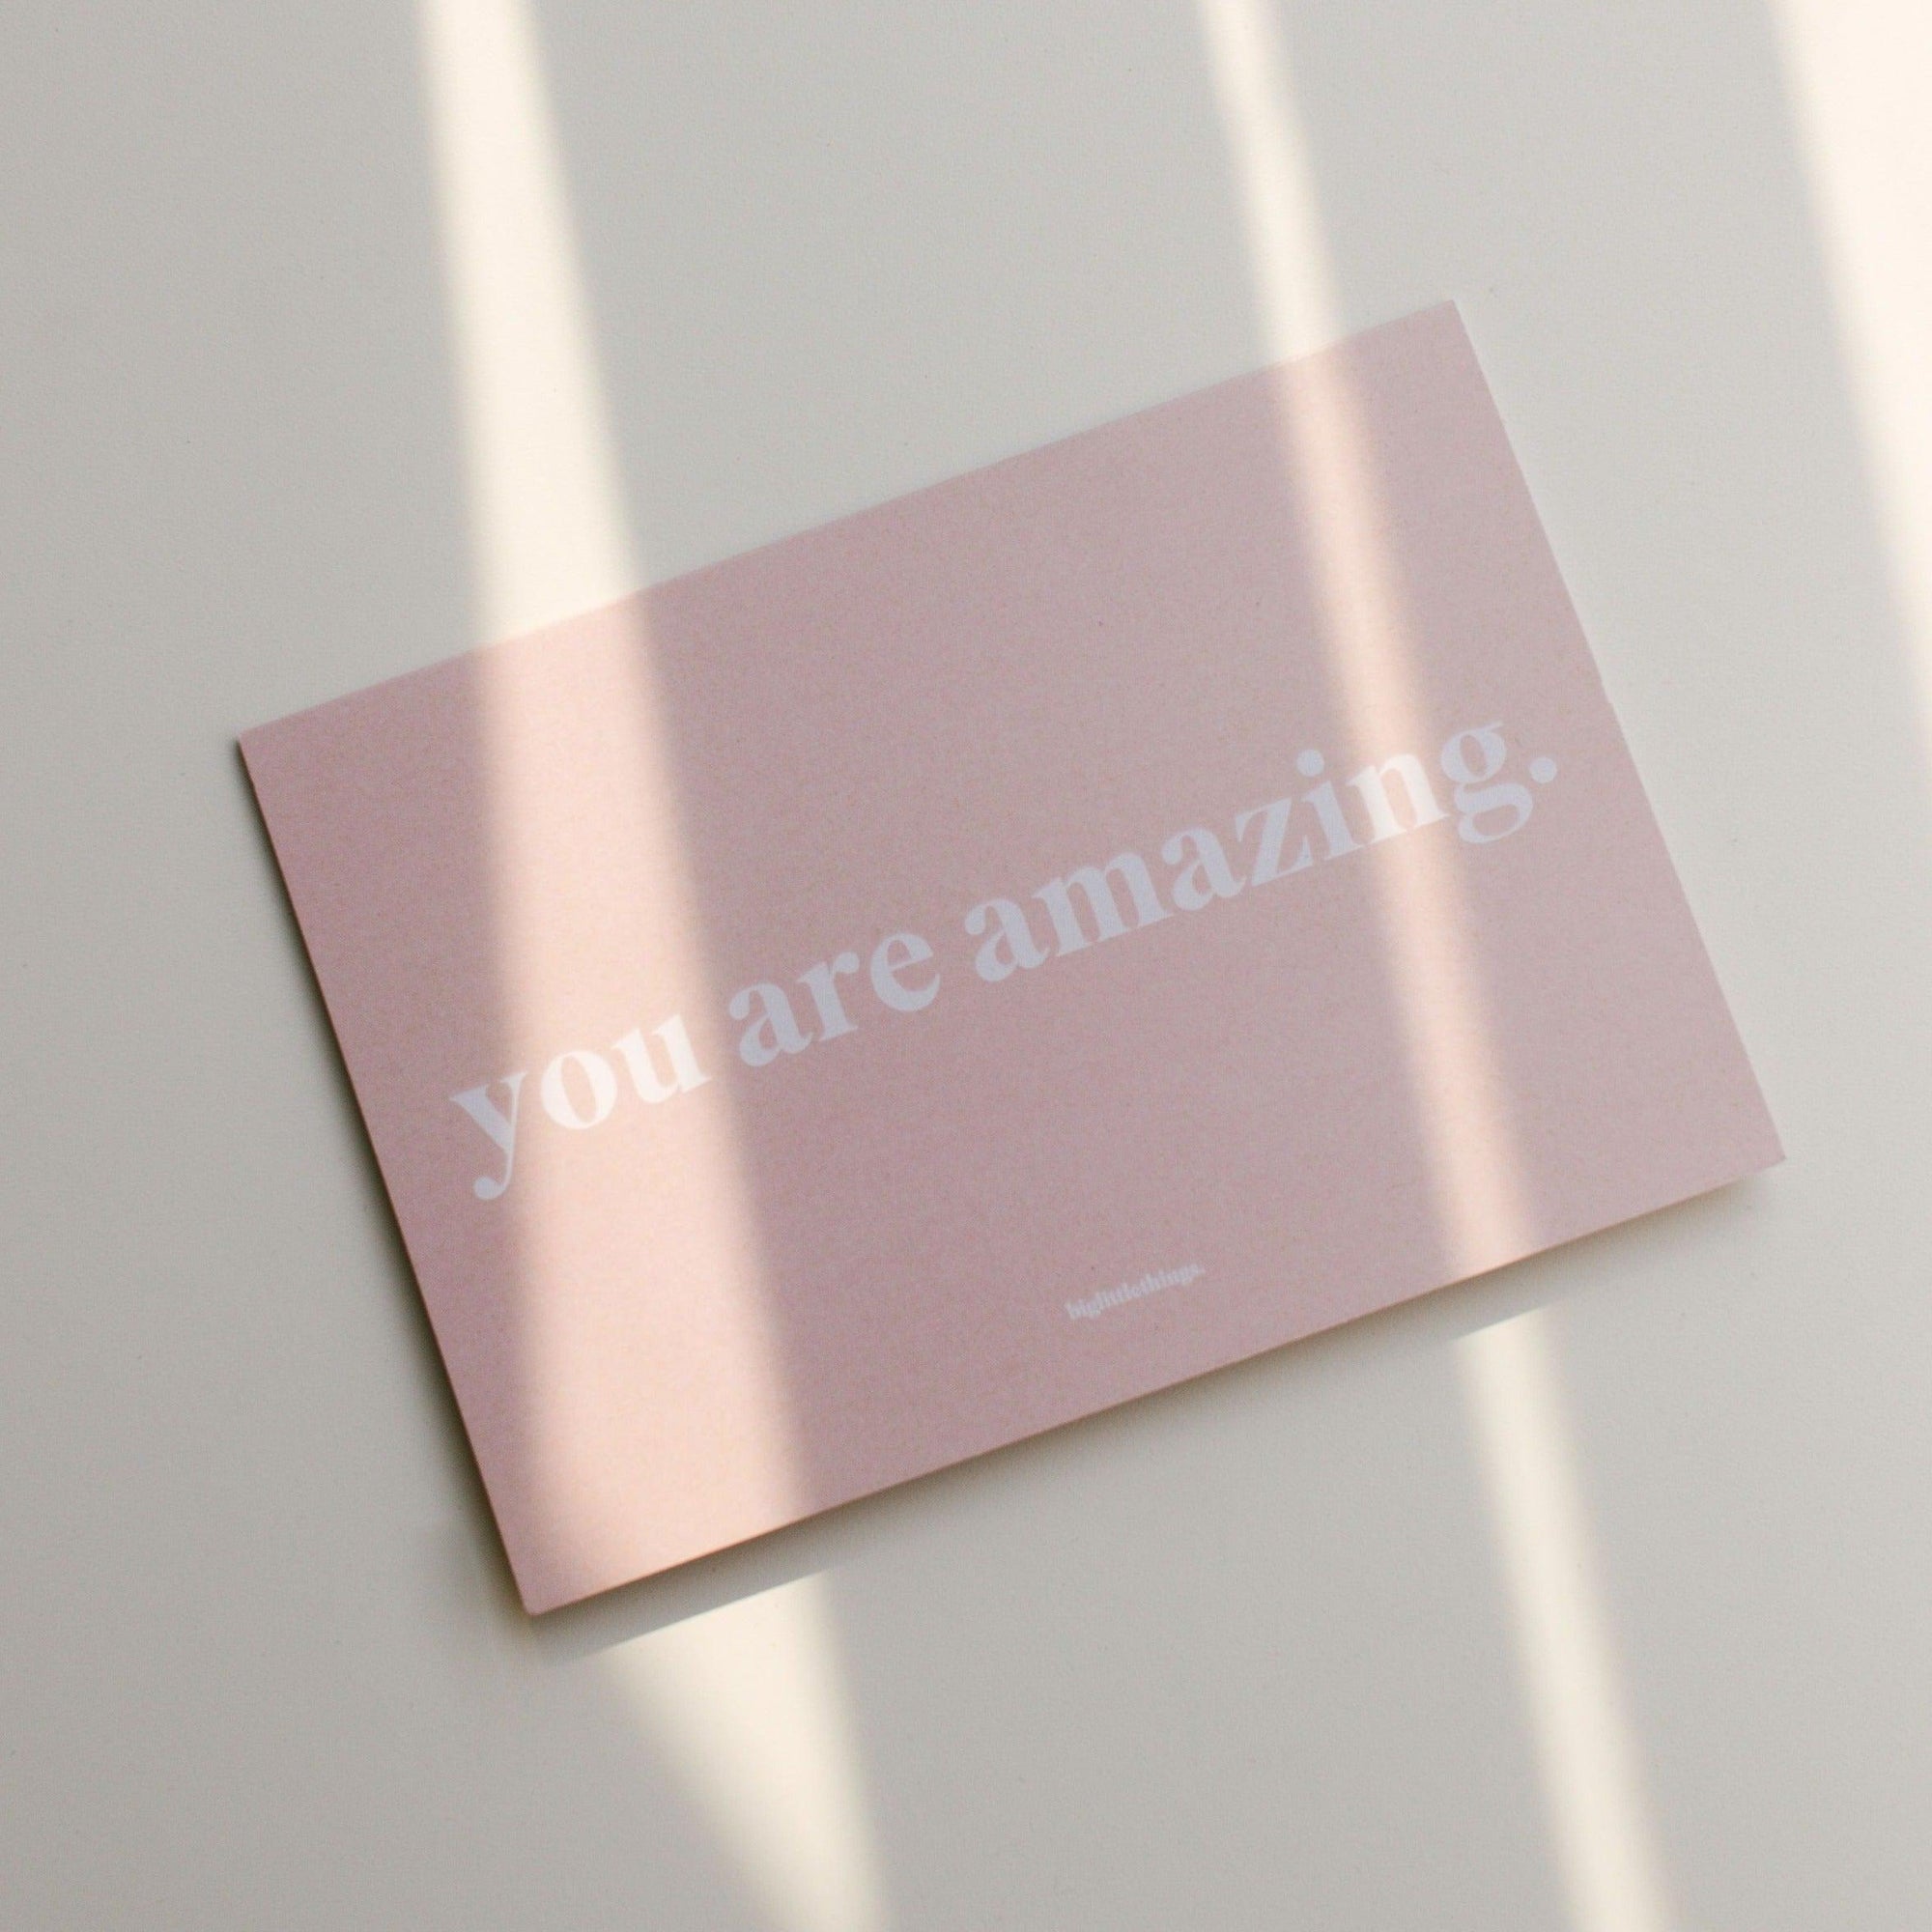 A pink greeting card with the words "you are amazing" by biglittlethings.